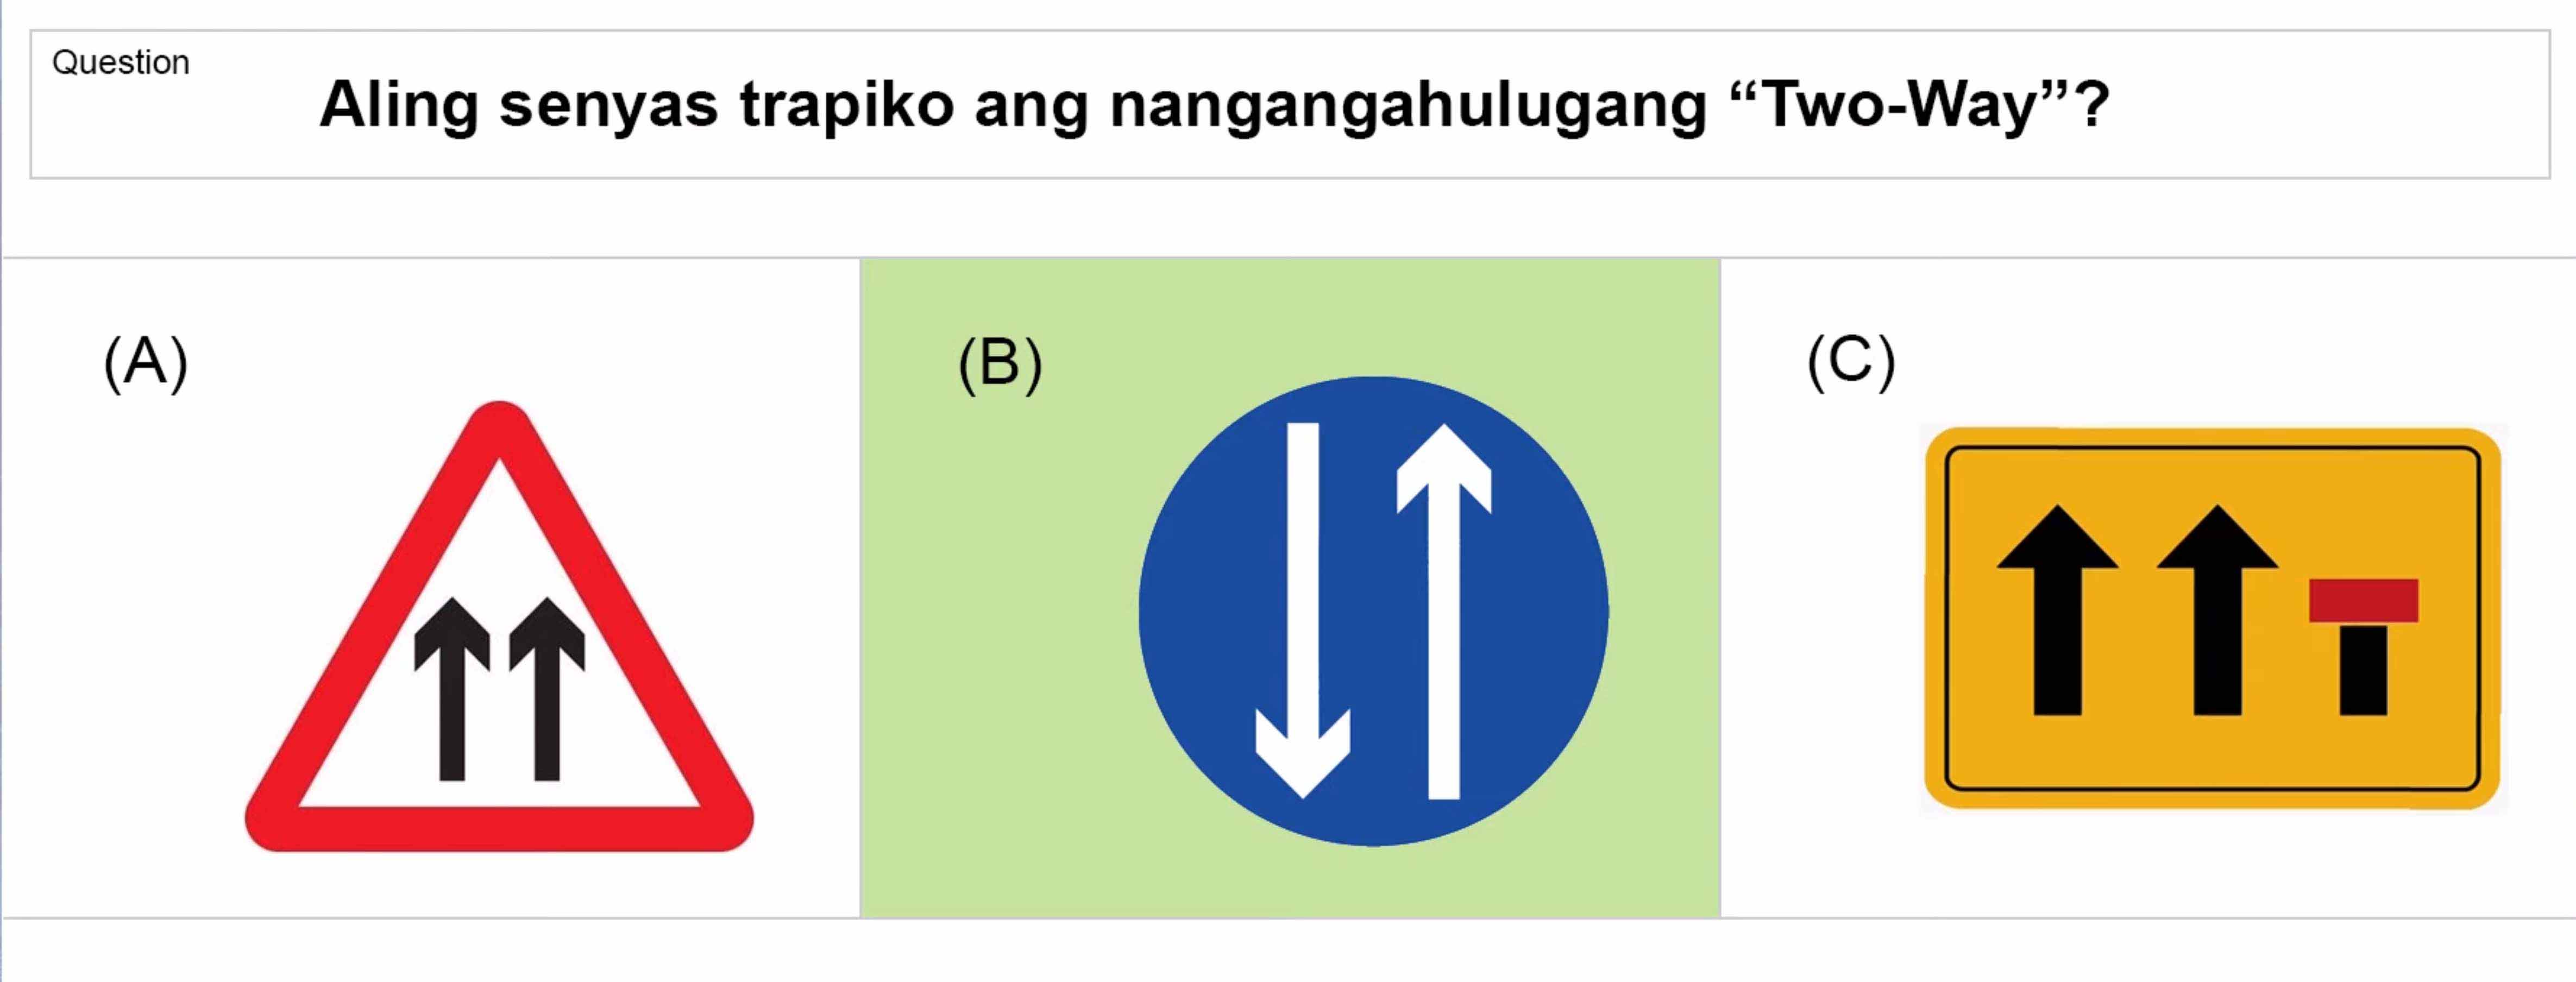 LTO Tagalog non professional exam reviewer light vehicle 3 (57)